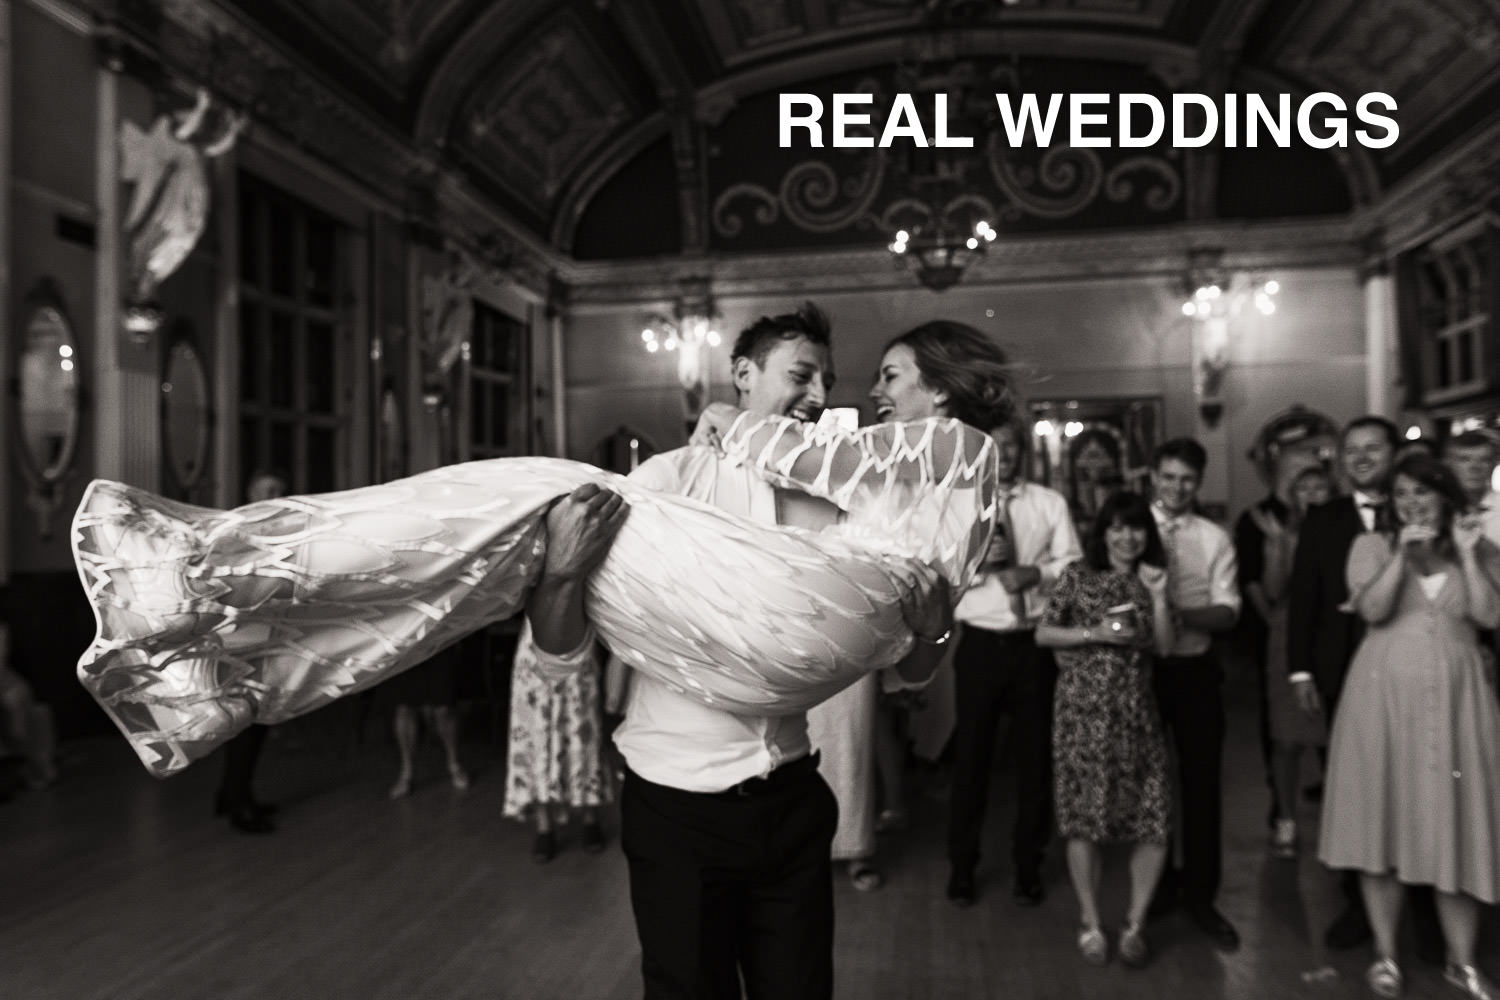 REAL WEDDINGS title photo. Groom picks up his wife and spins her around at a wedding reception at the Old Finsbury Town Hall. The bride, wearing the Willow dress from Halfpenny London. Captured in a documentary wedding photography style.